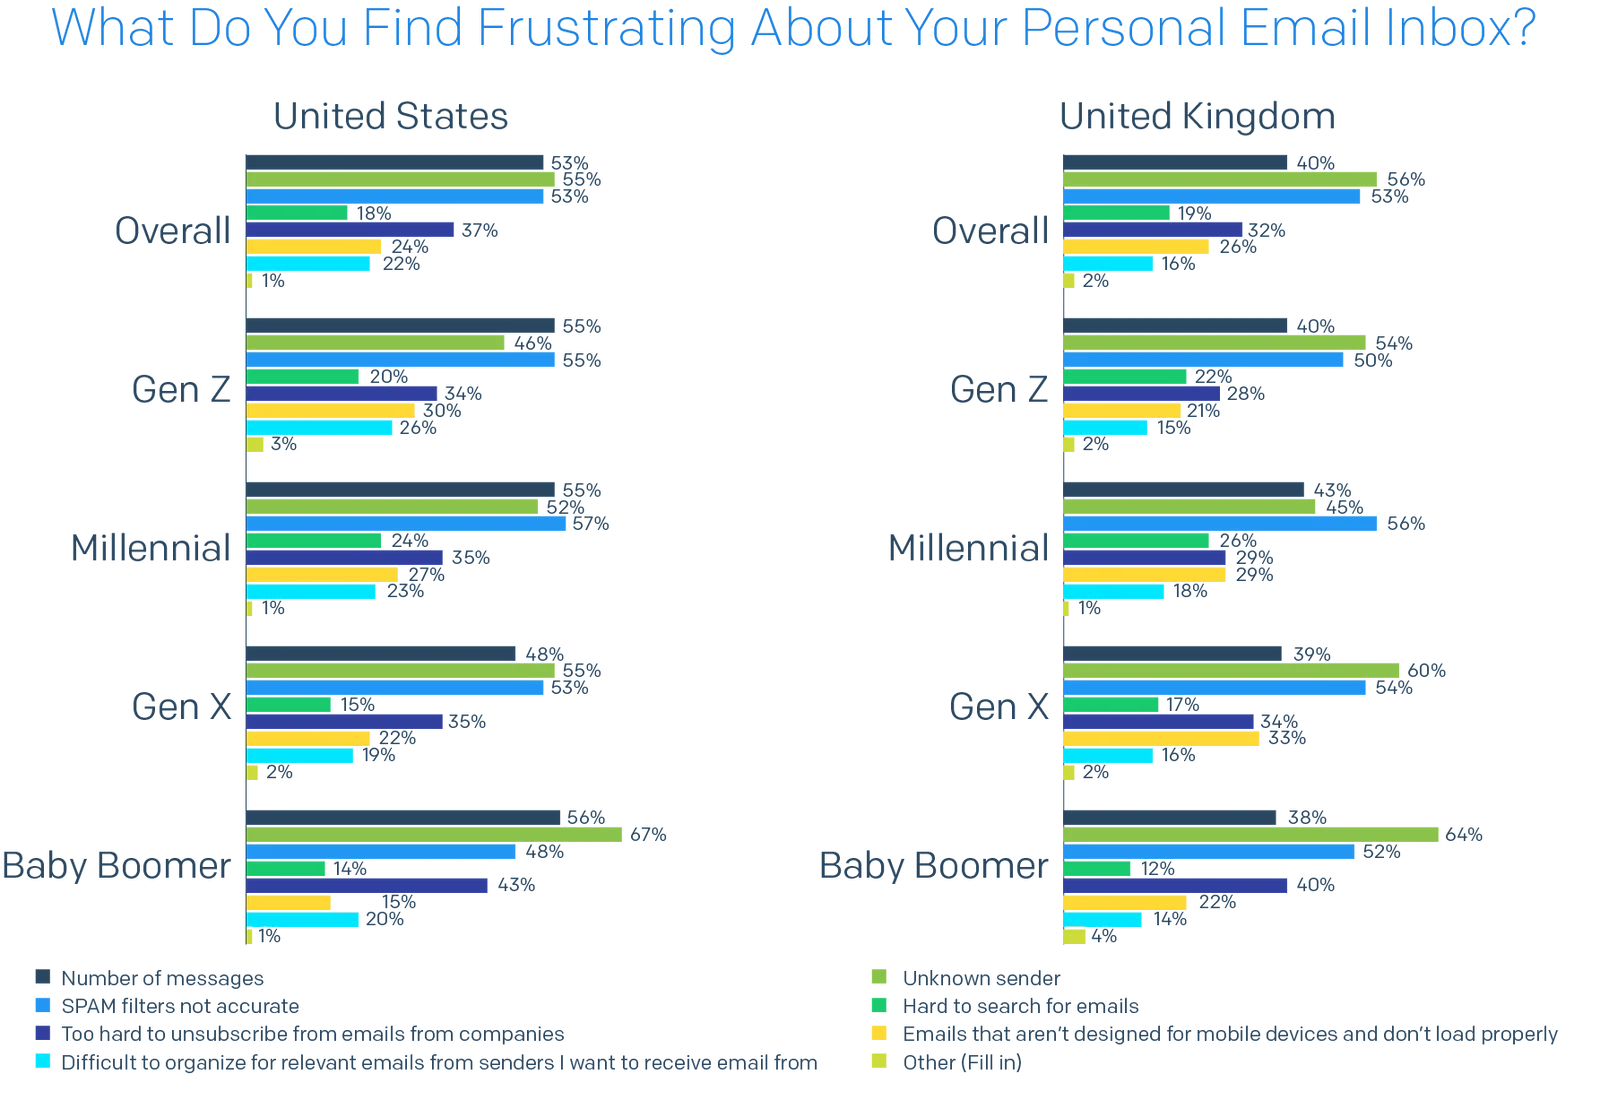 Bar chart of What Do You Find Frustrating About Your Personal Email Inbox? by country